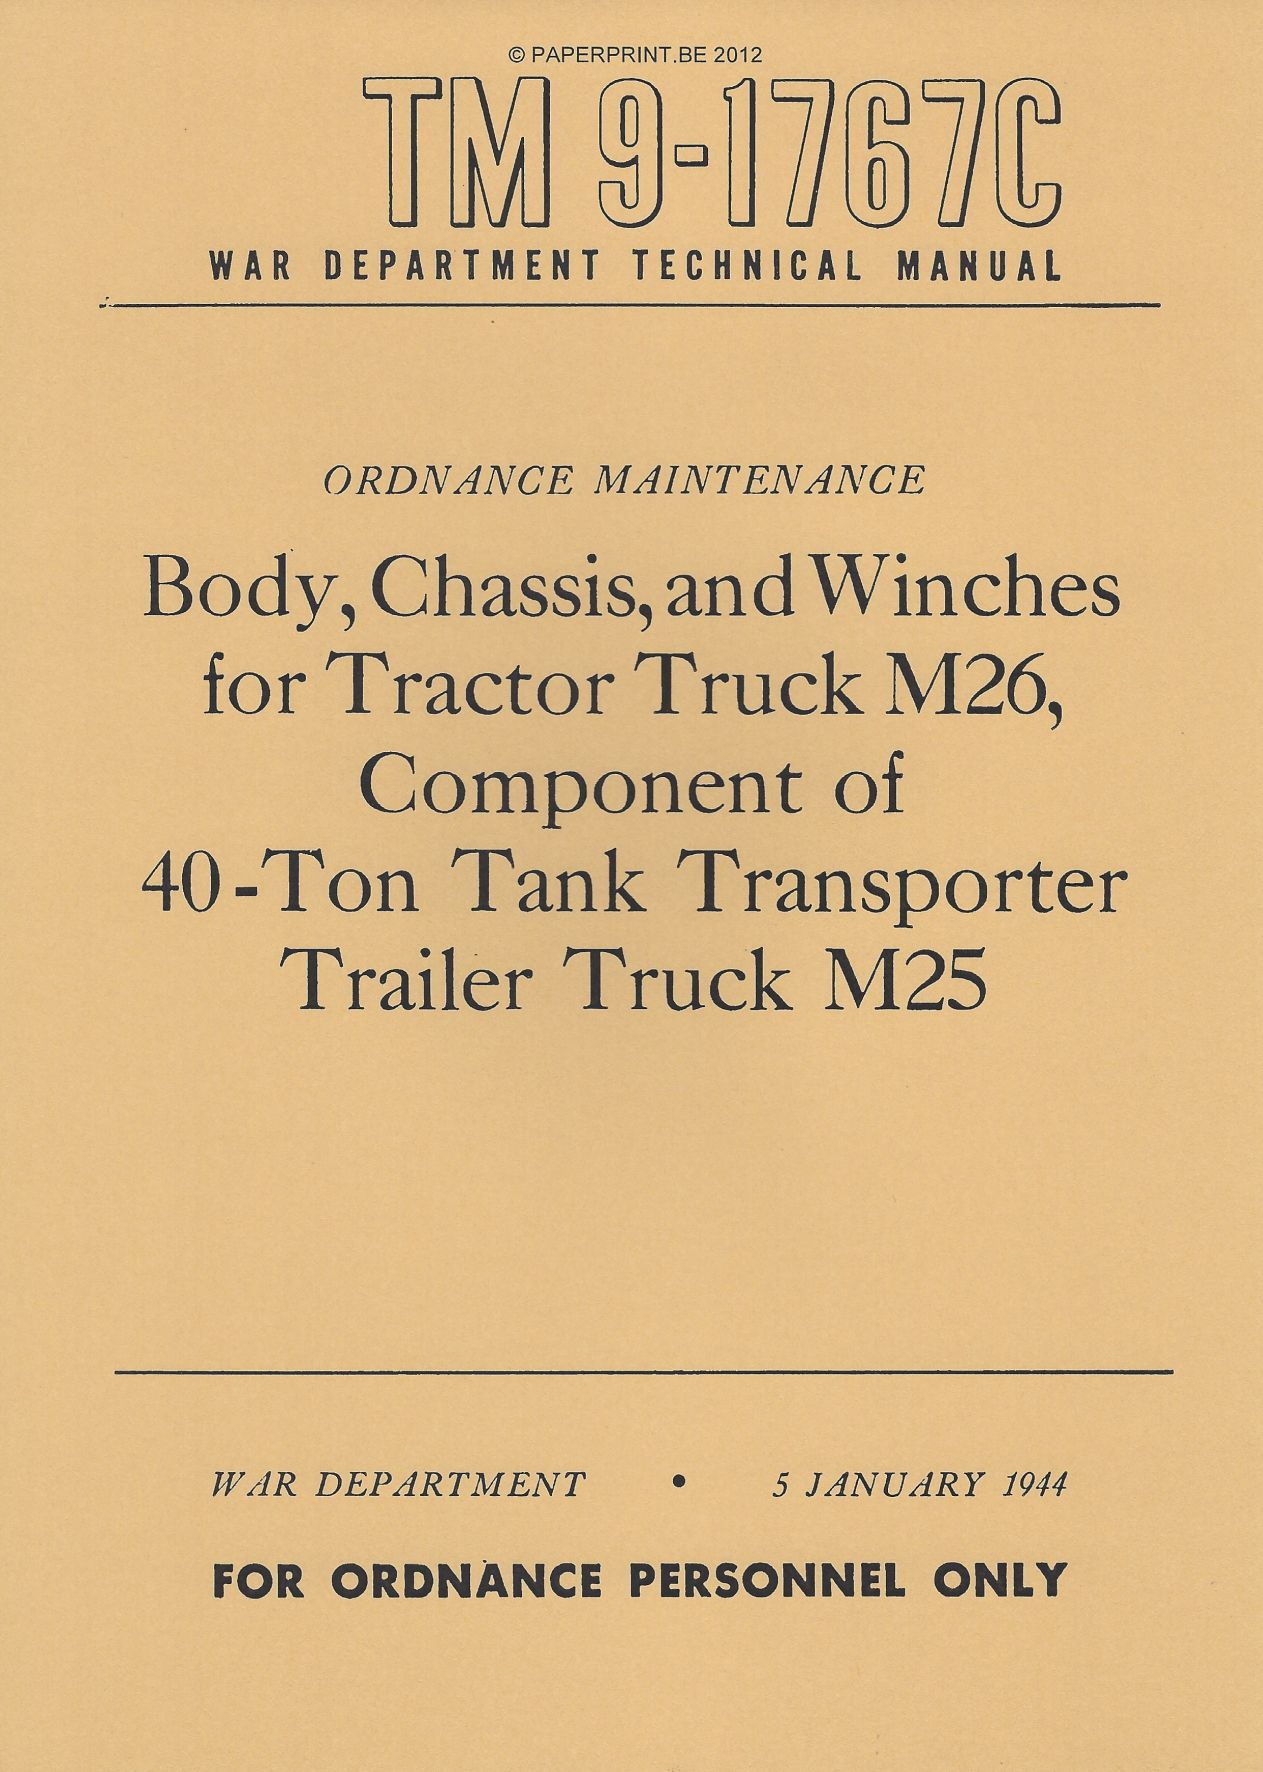 TM 9-1767C US BODY, CHASSIS AND WINCHES FOR TRACTOR TRUCK M26, COMPONENT OF 40-TON TANK TRANSPORTER TRAILER TRUCK M25